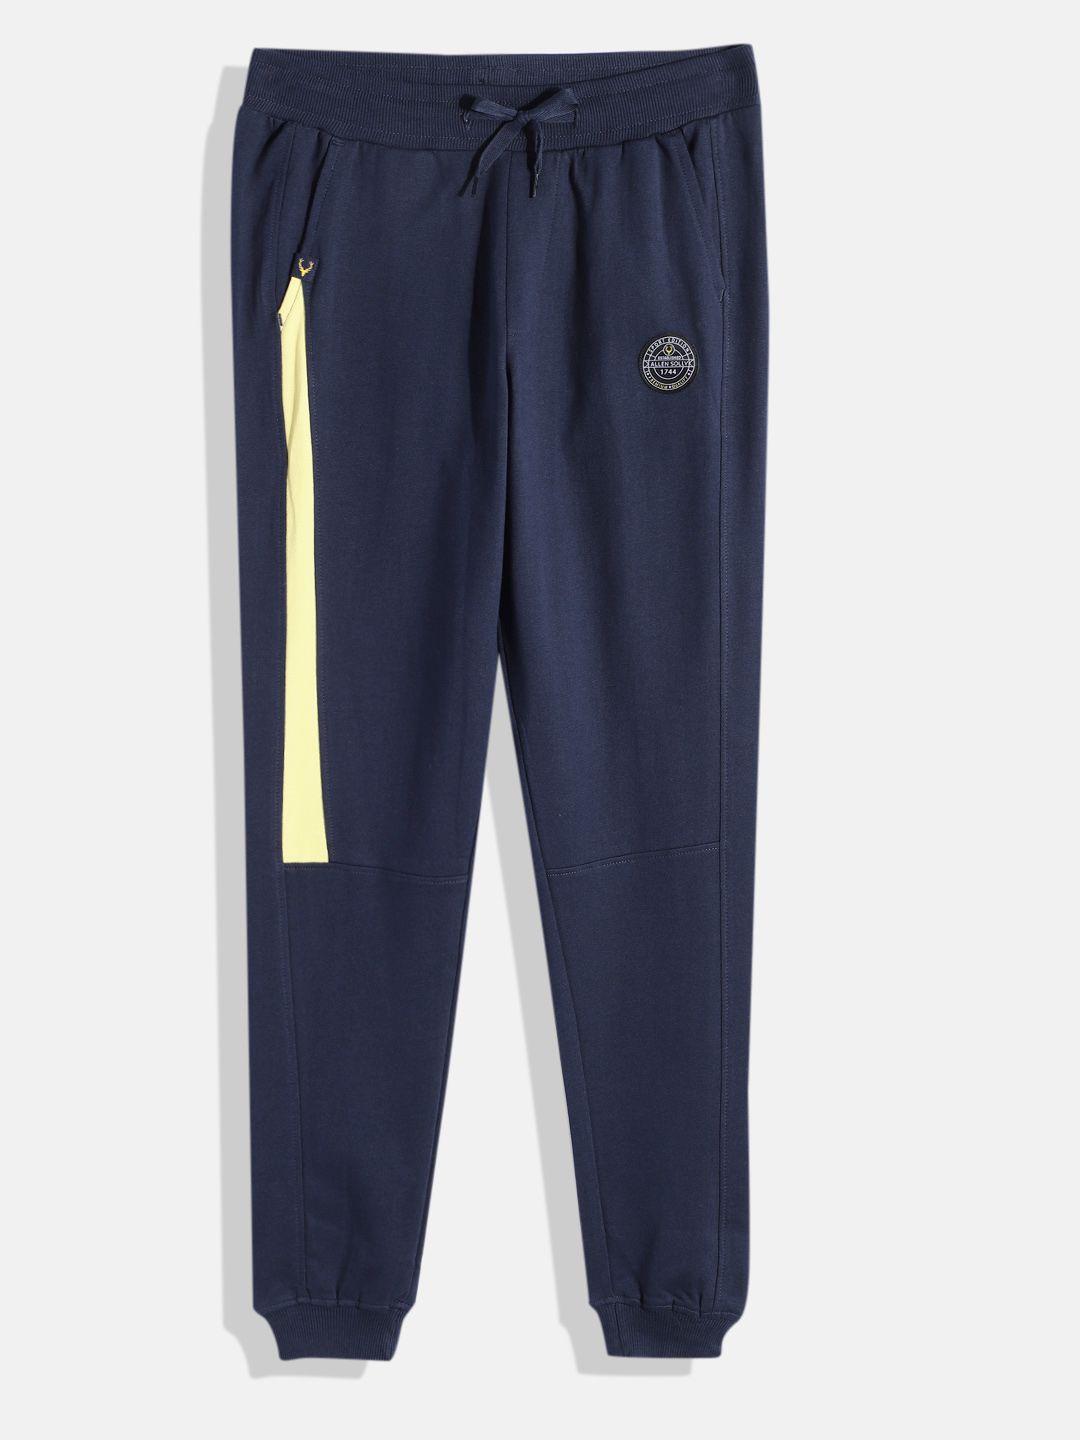 allen solly junior boys solid mid-rise pure cotton joggers with half side taping detail